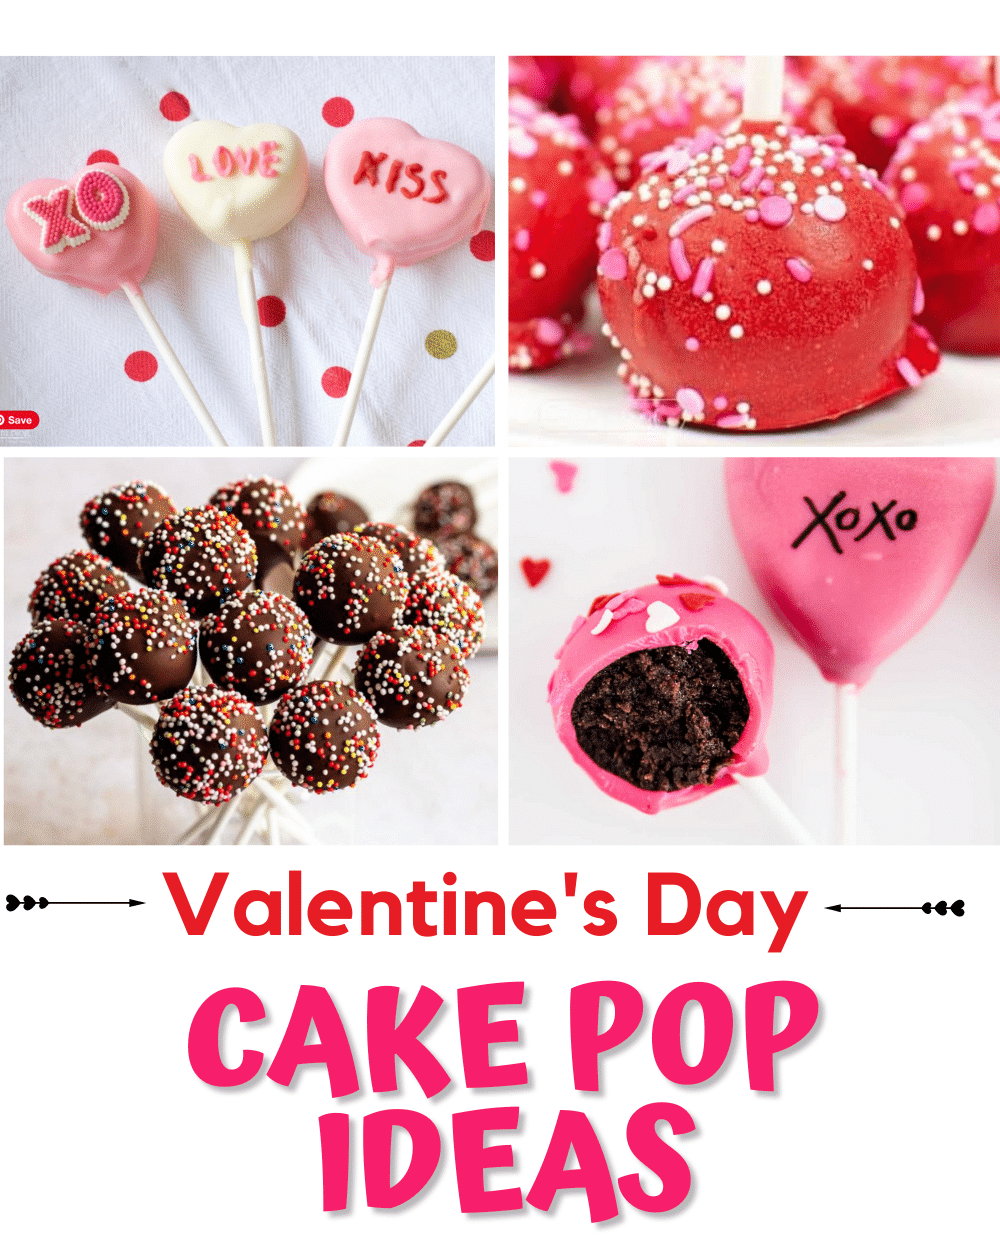 The collection of the best Valentine's Day Cake Pop Ideas creates some of the most beautiful and delicious bite-sized desserts you'll ever taste.